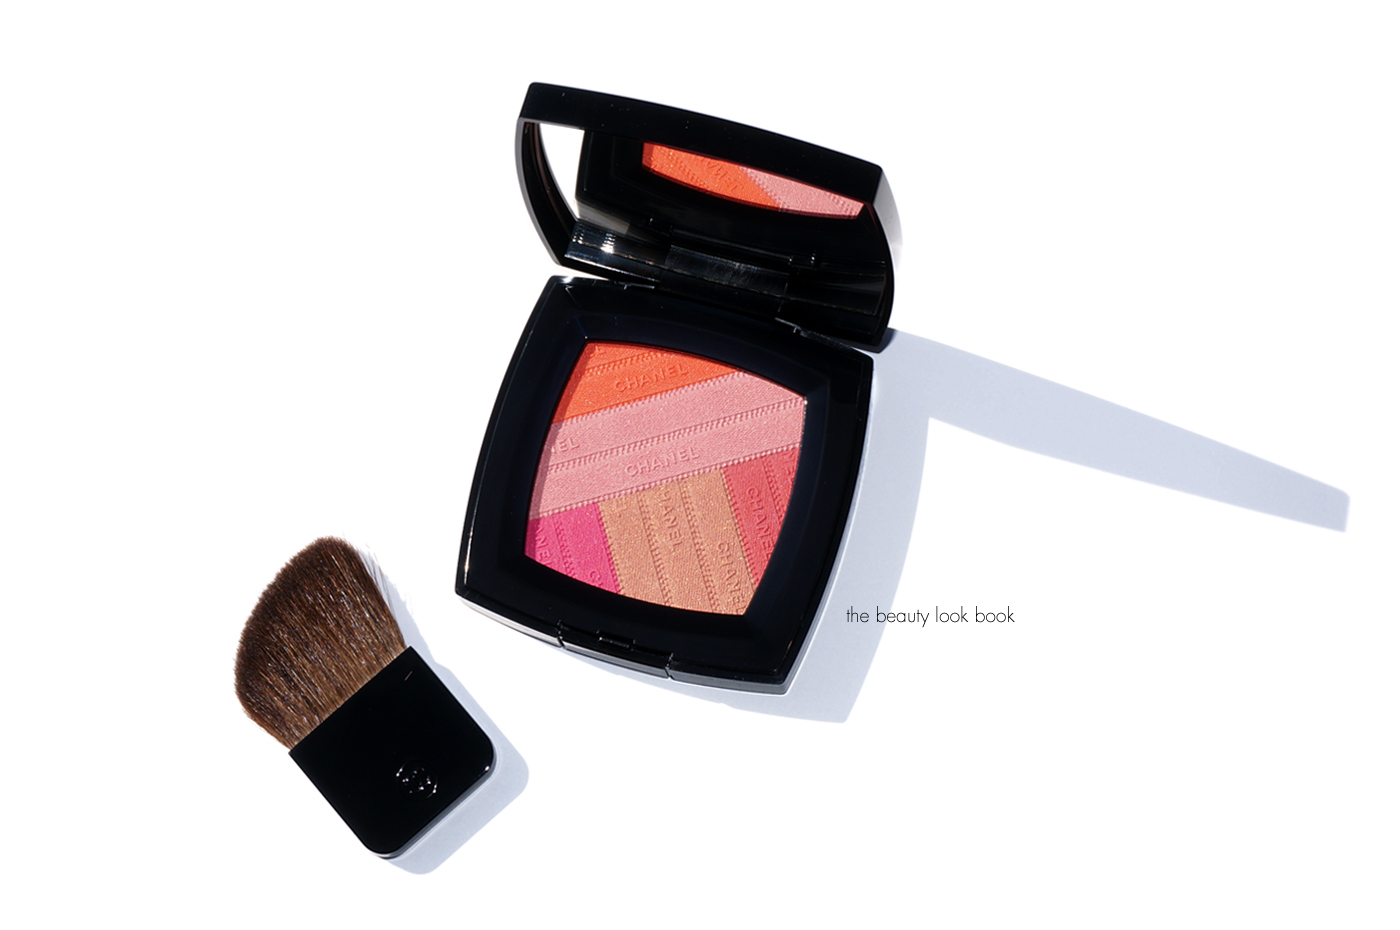 Chanel Collection L.A. Sunrise for Spring 2016 - The Beauty Look Book Picks  - The Beauty Look Book